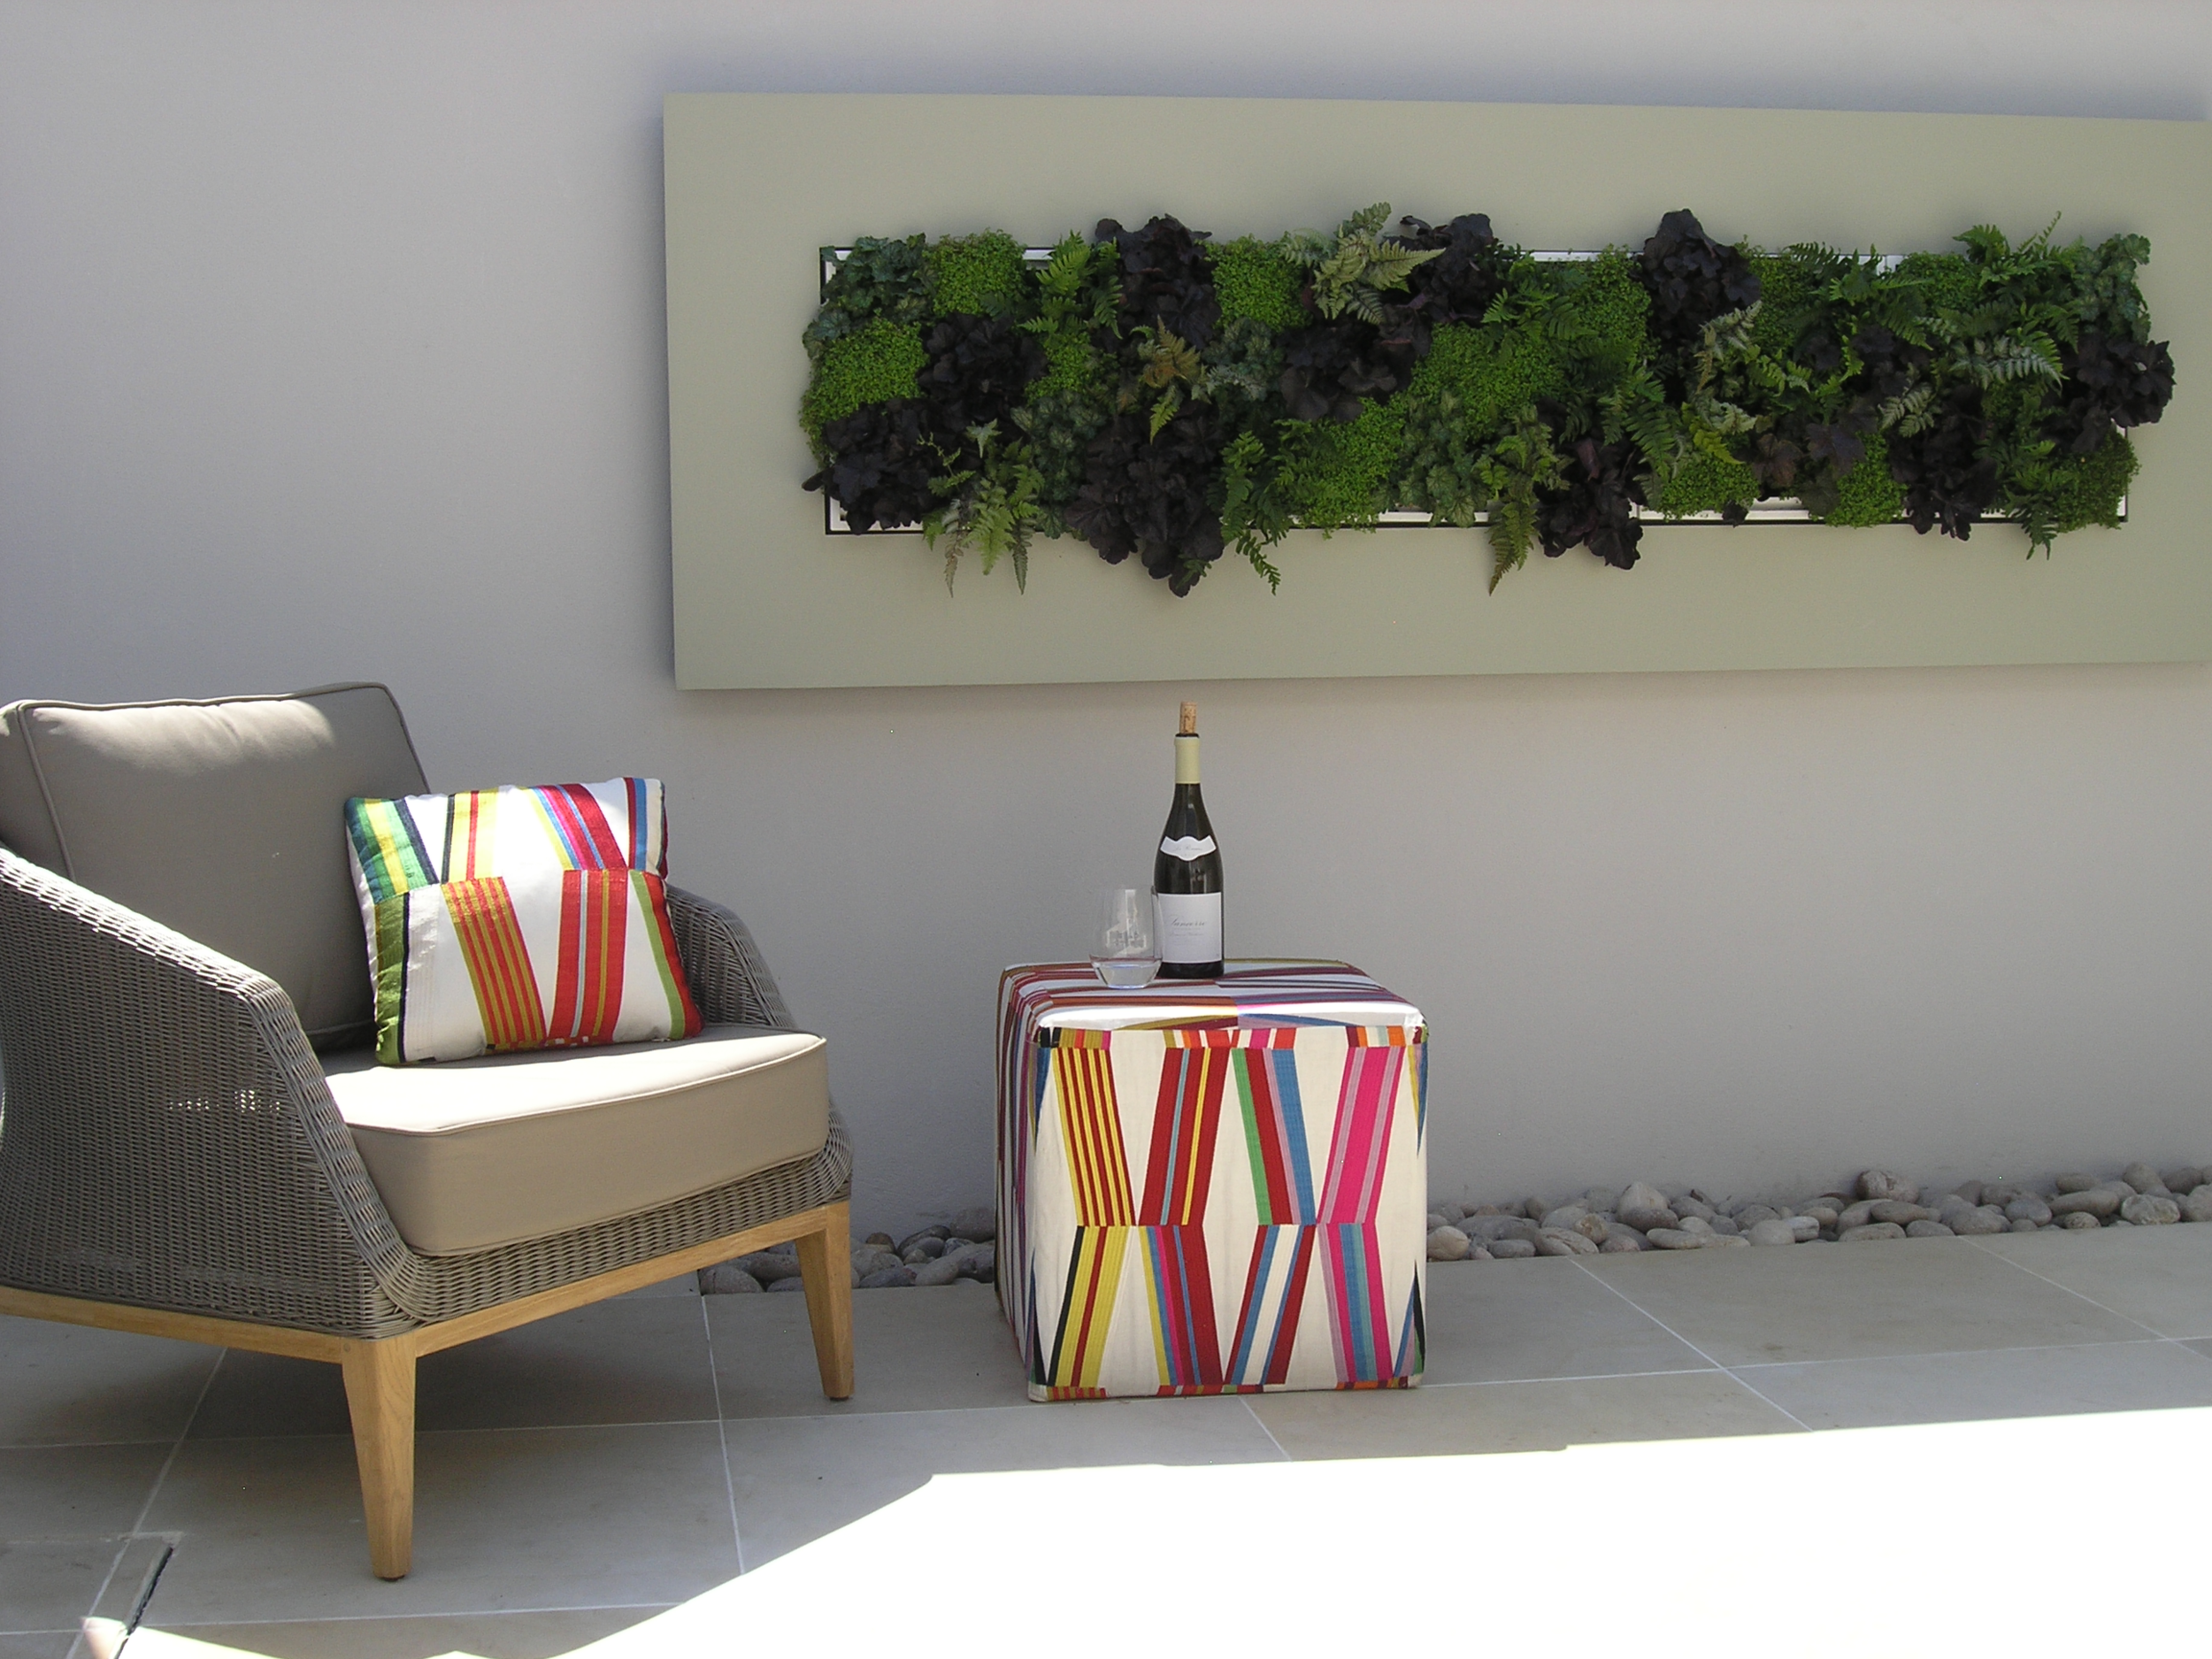  Courtyard ideas by London landscapers with colourful outdoor furniture and plants set into the wall. 